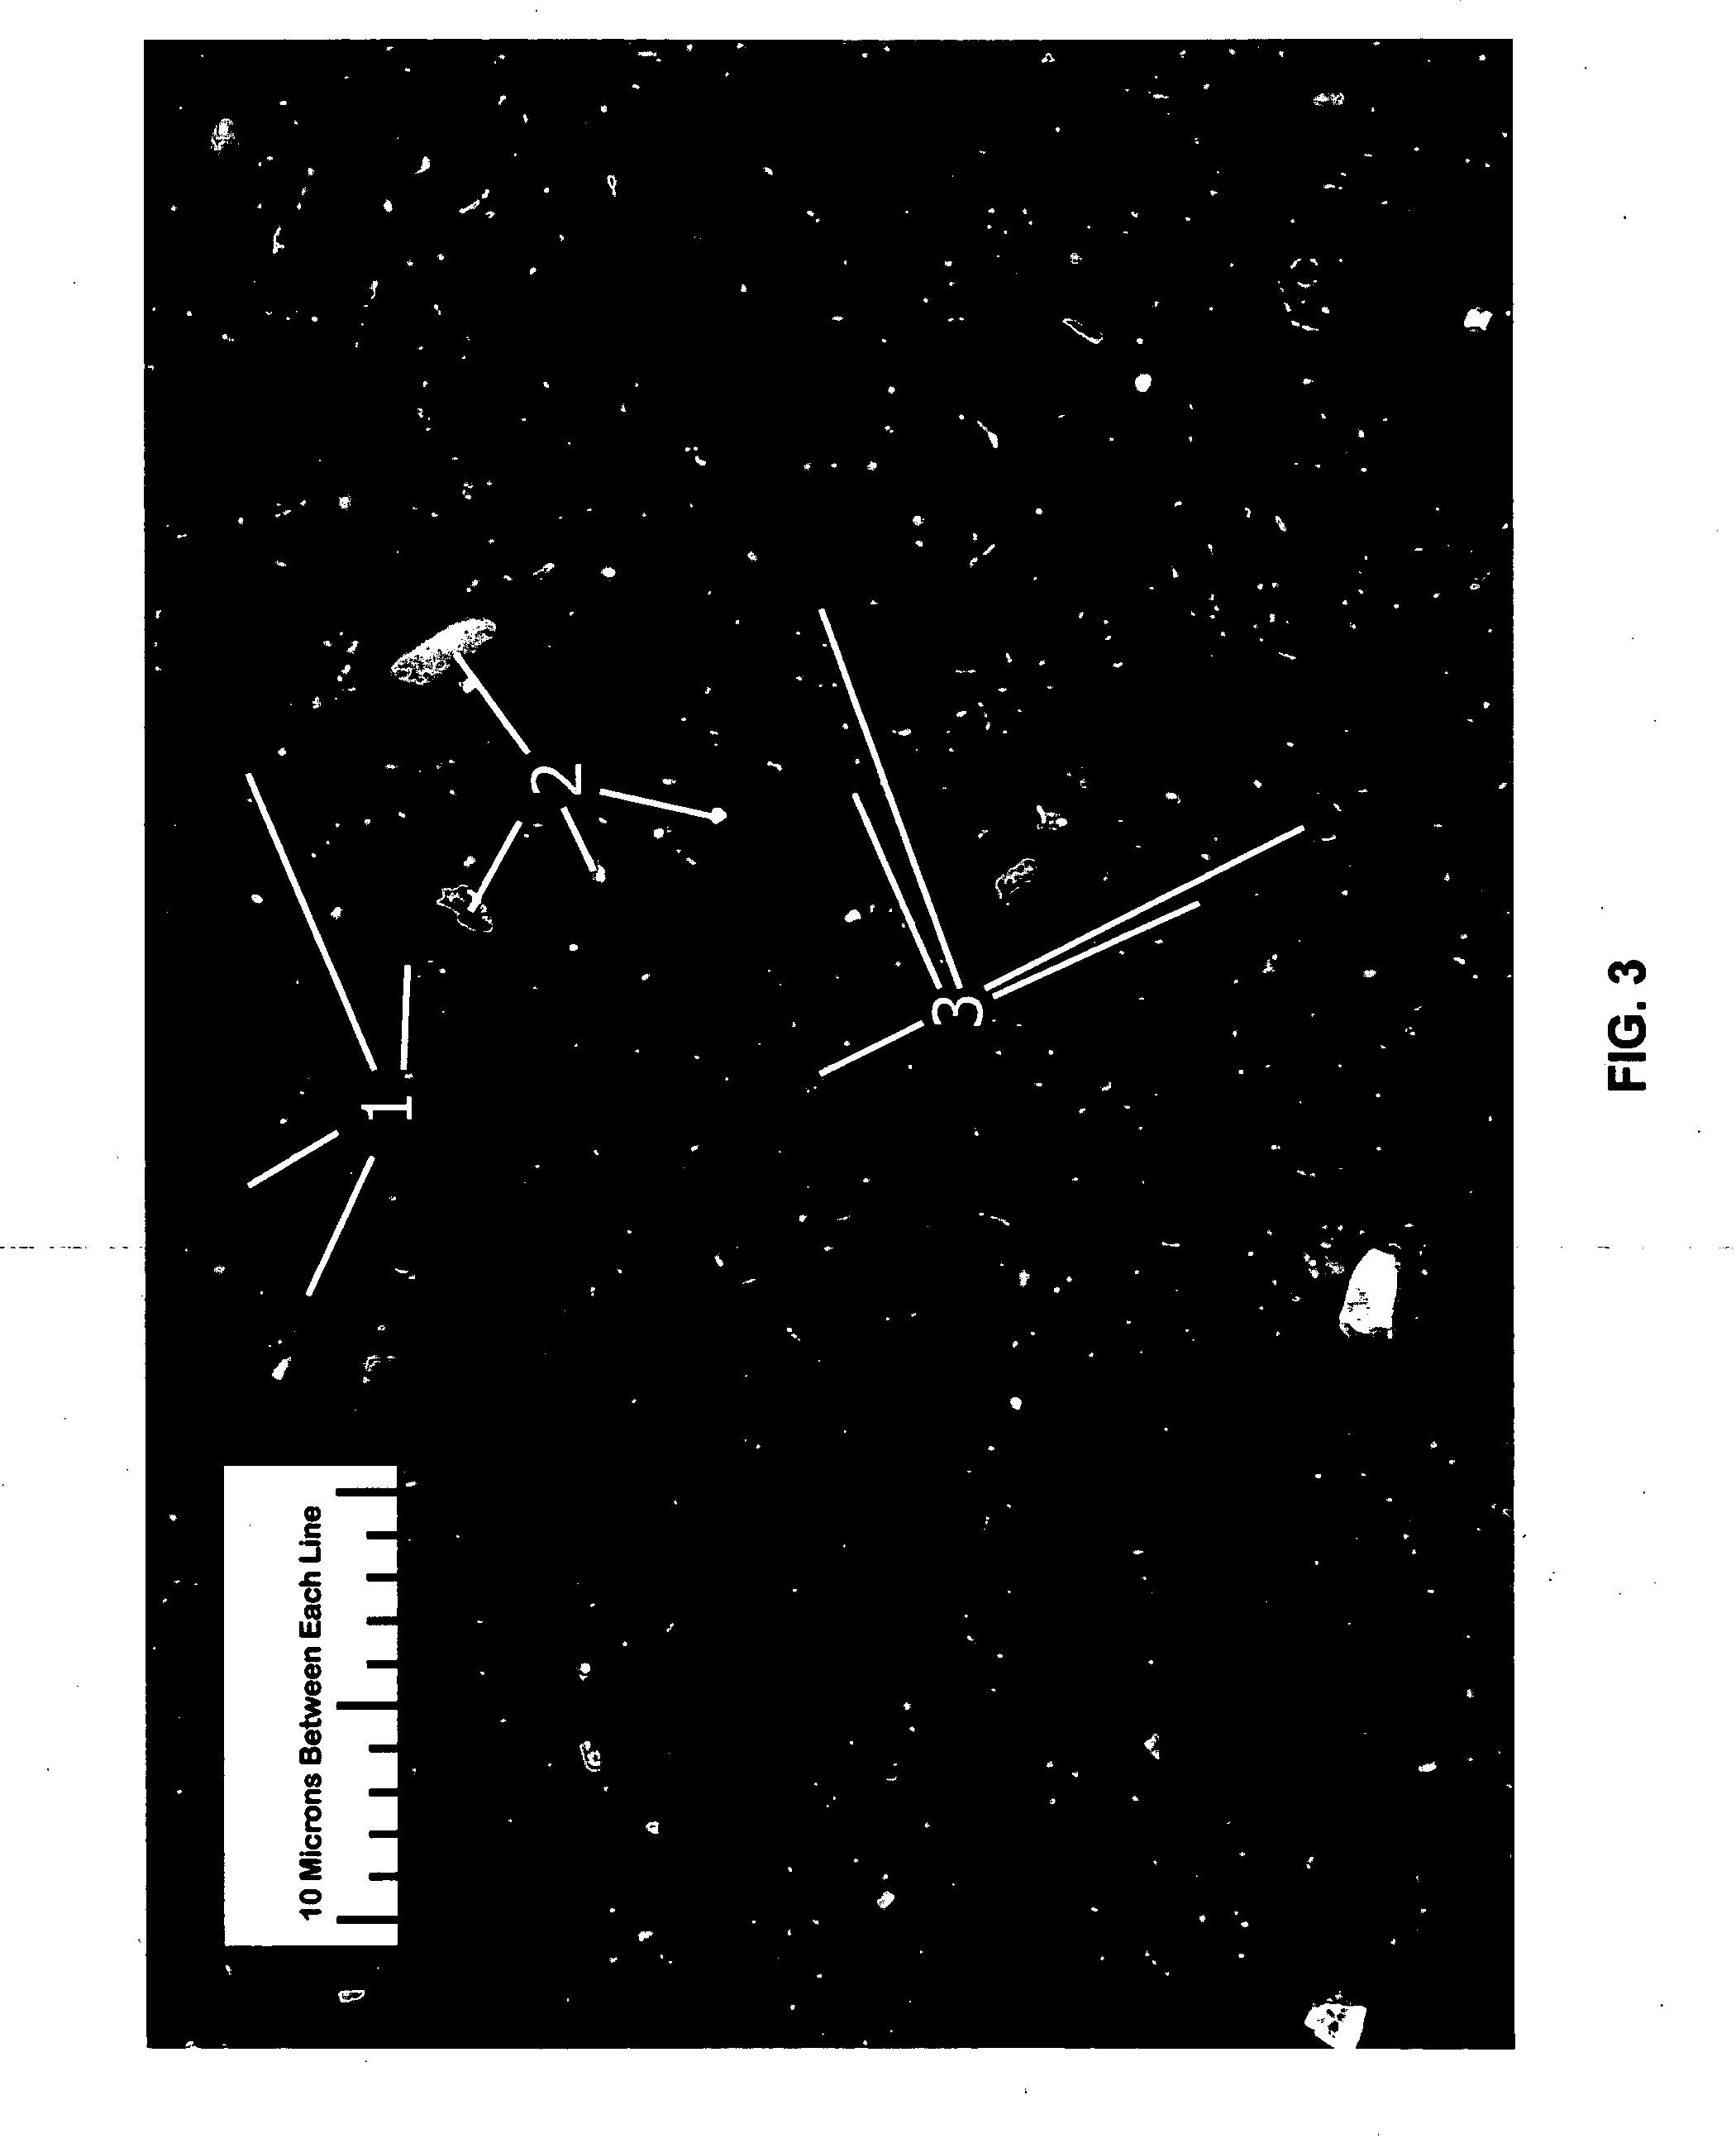 Chocolate products containing amorphous solids and methods of producing same